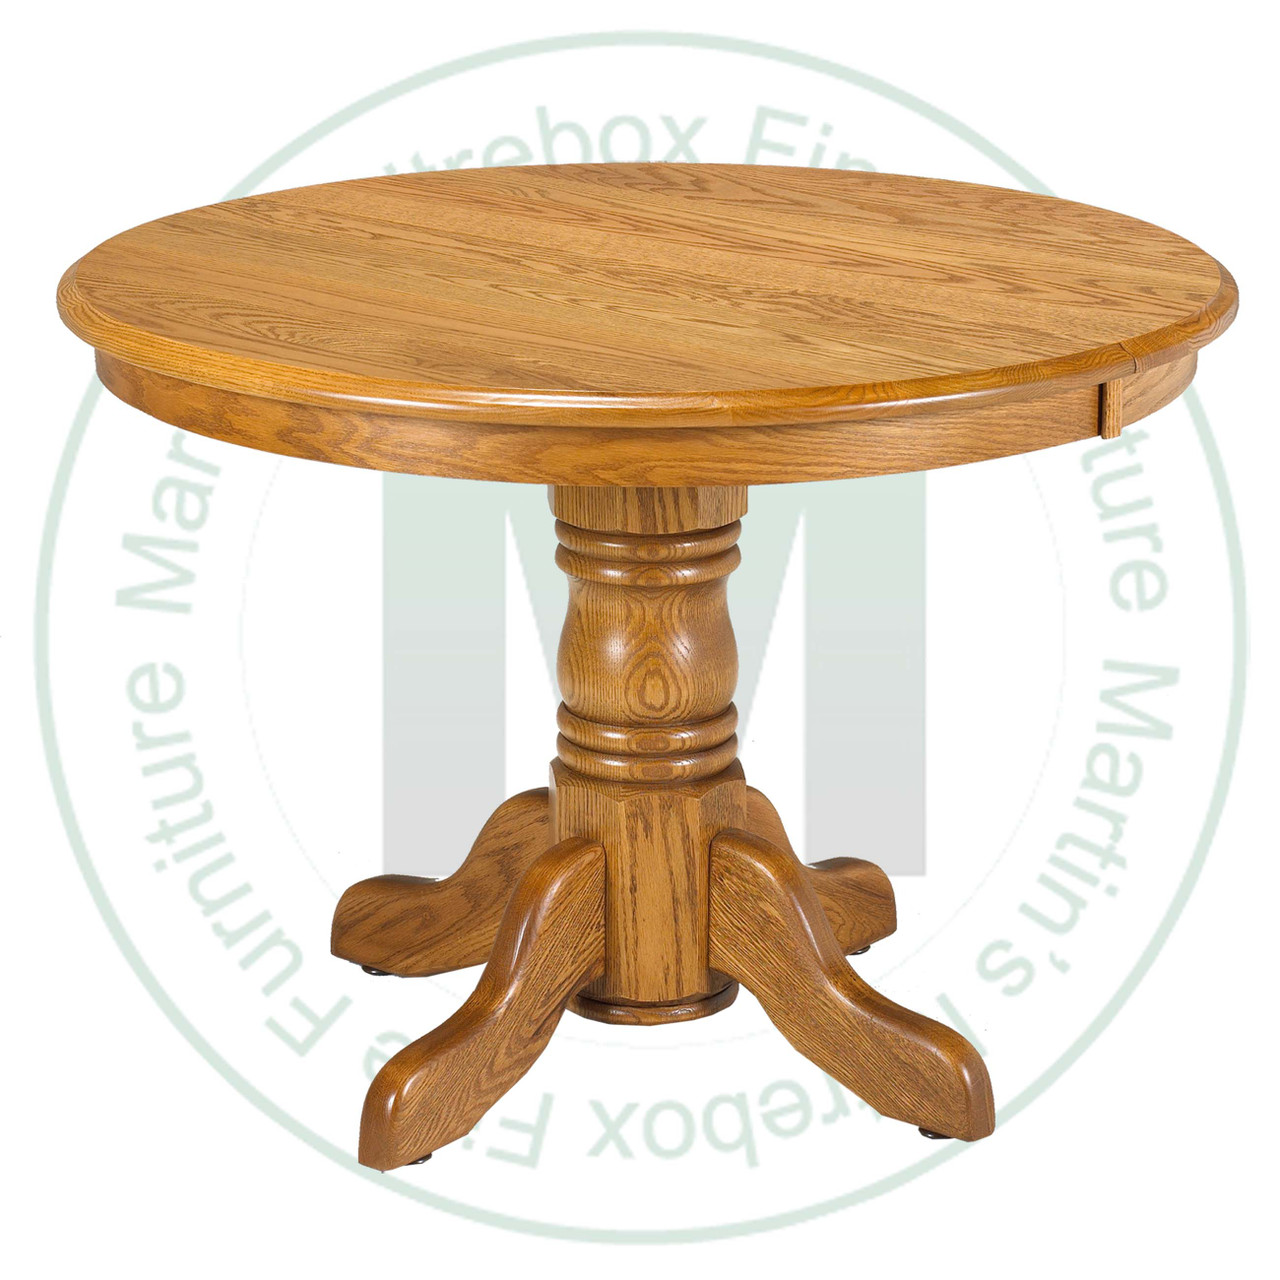 Wormy Maple Lancaster Collection Single Pedestal Table 36''D x 42''W x 30''H  Round Solid Table. Table Has 1.25'' Thick Top